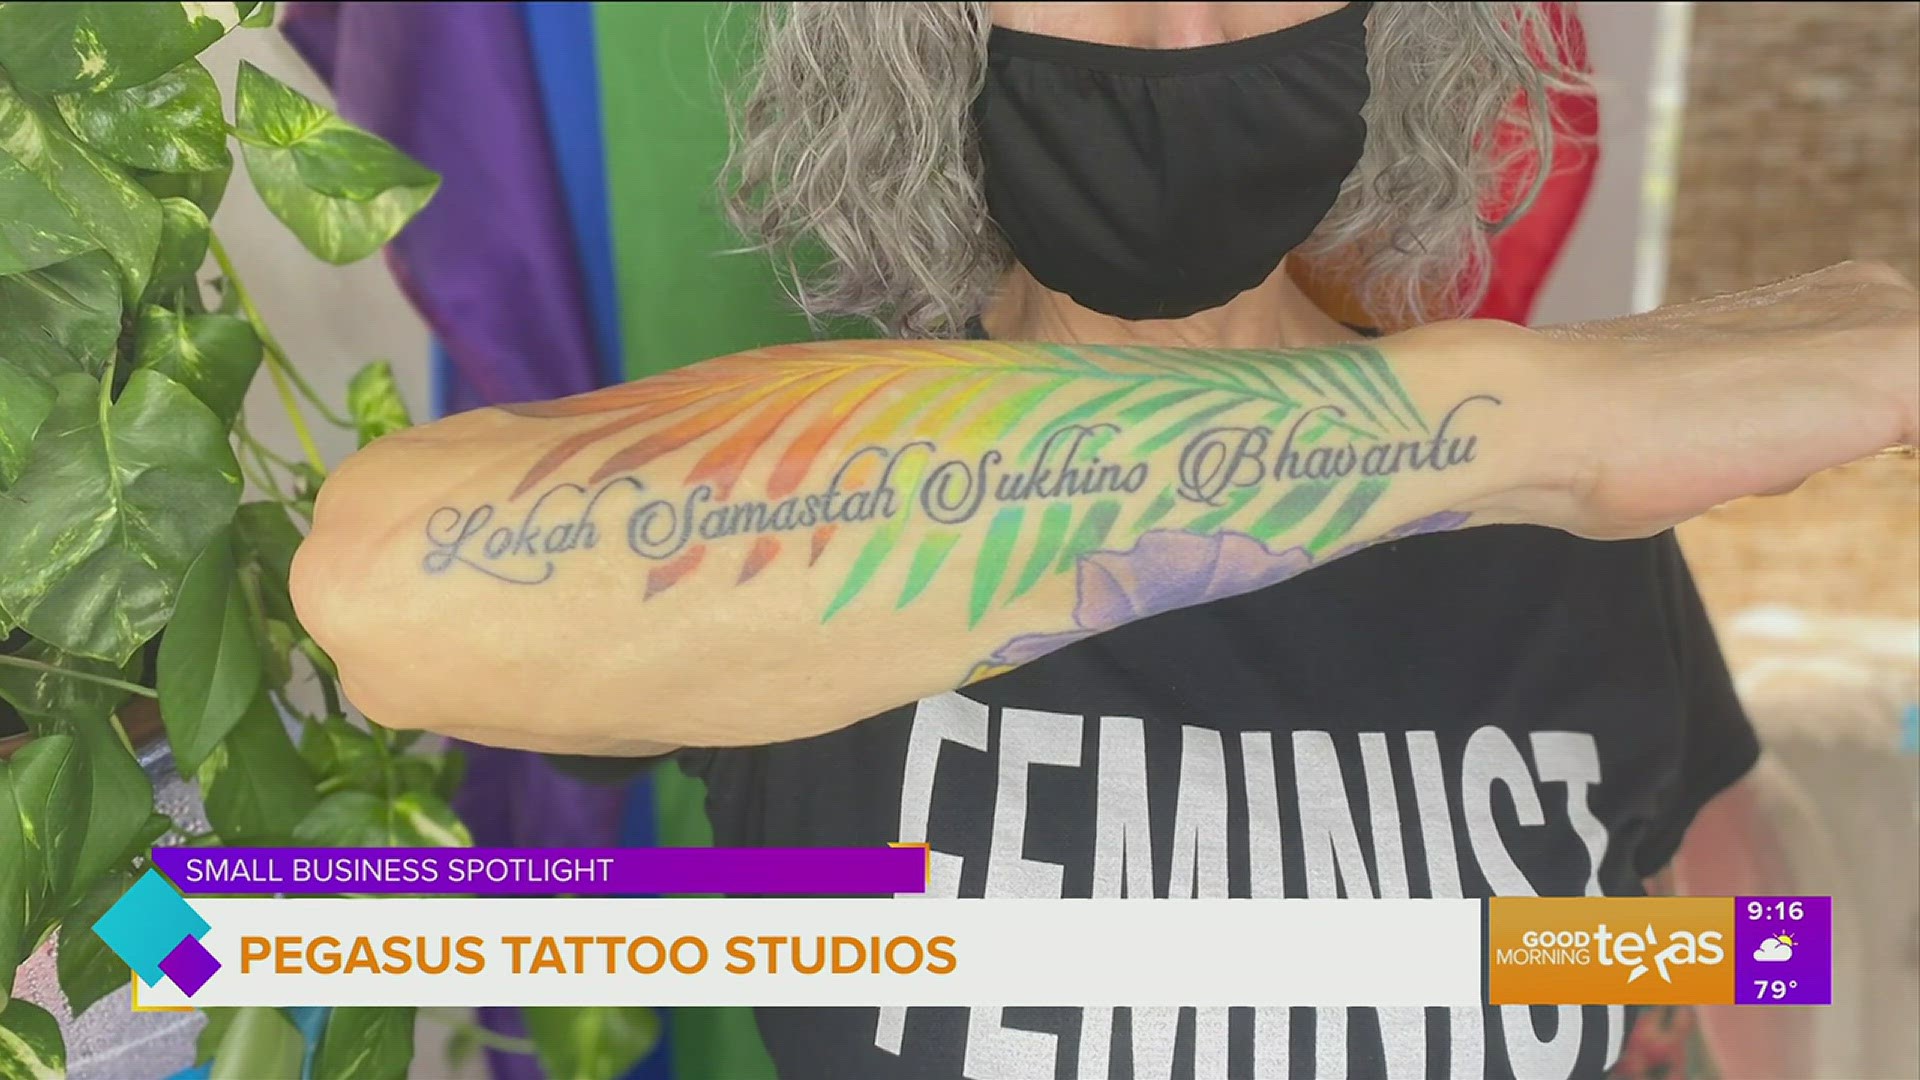 Tattoo artists with Pegasus Tattoo Studios joined us to share how they plan to not only leave a permanent mark on your skin, but on the world.